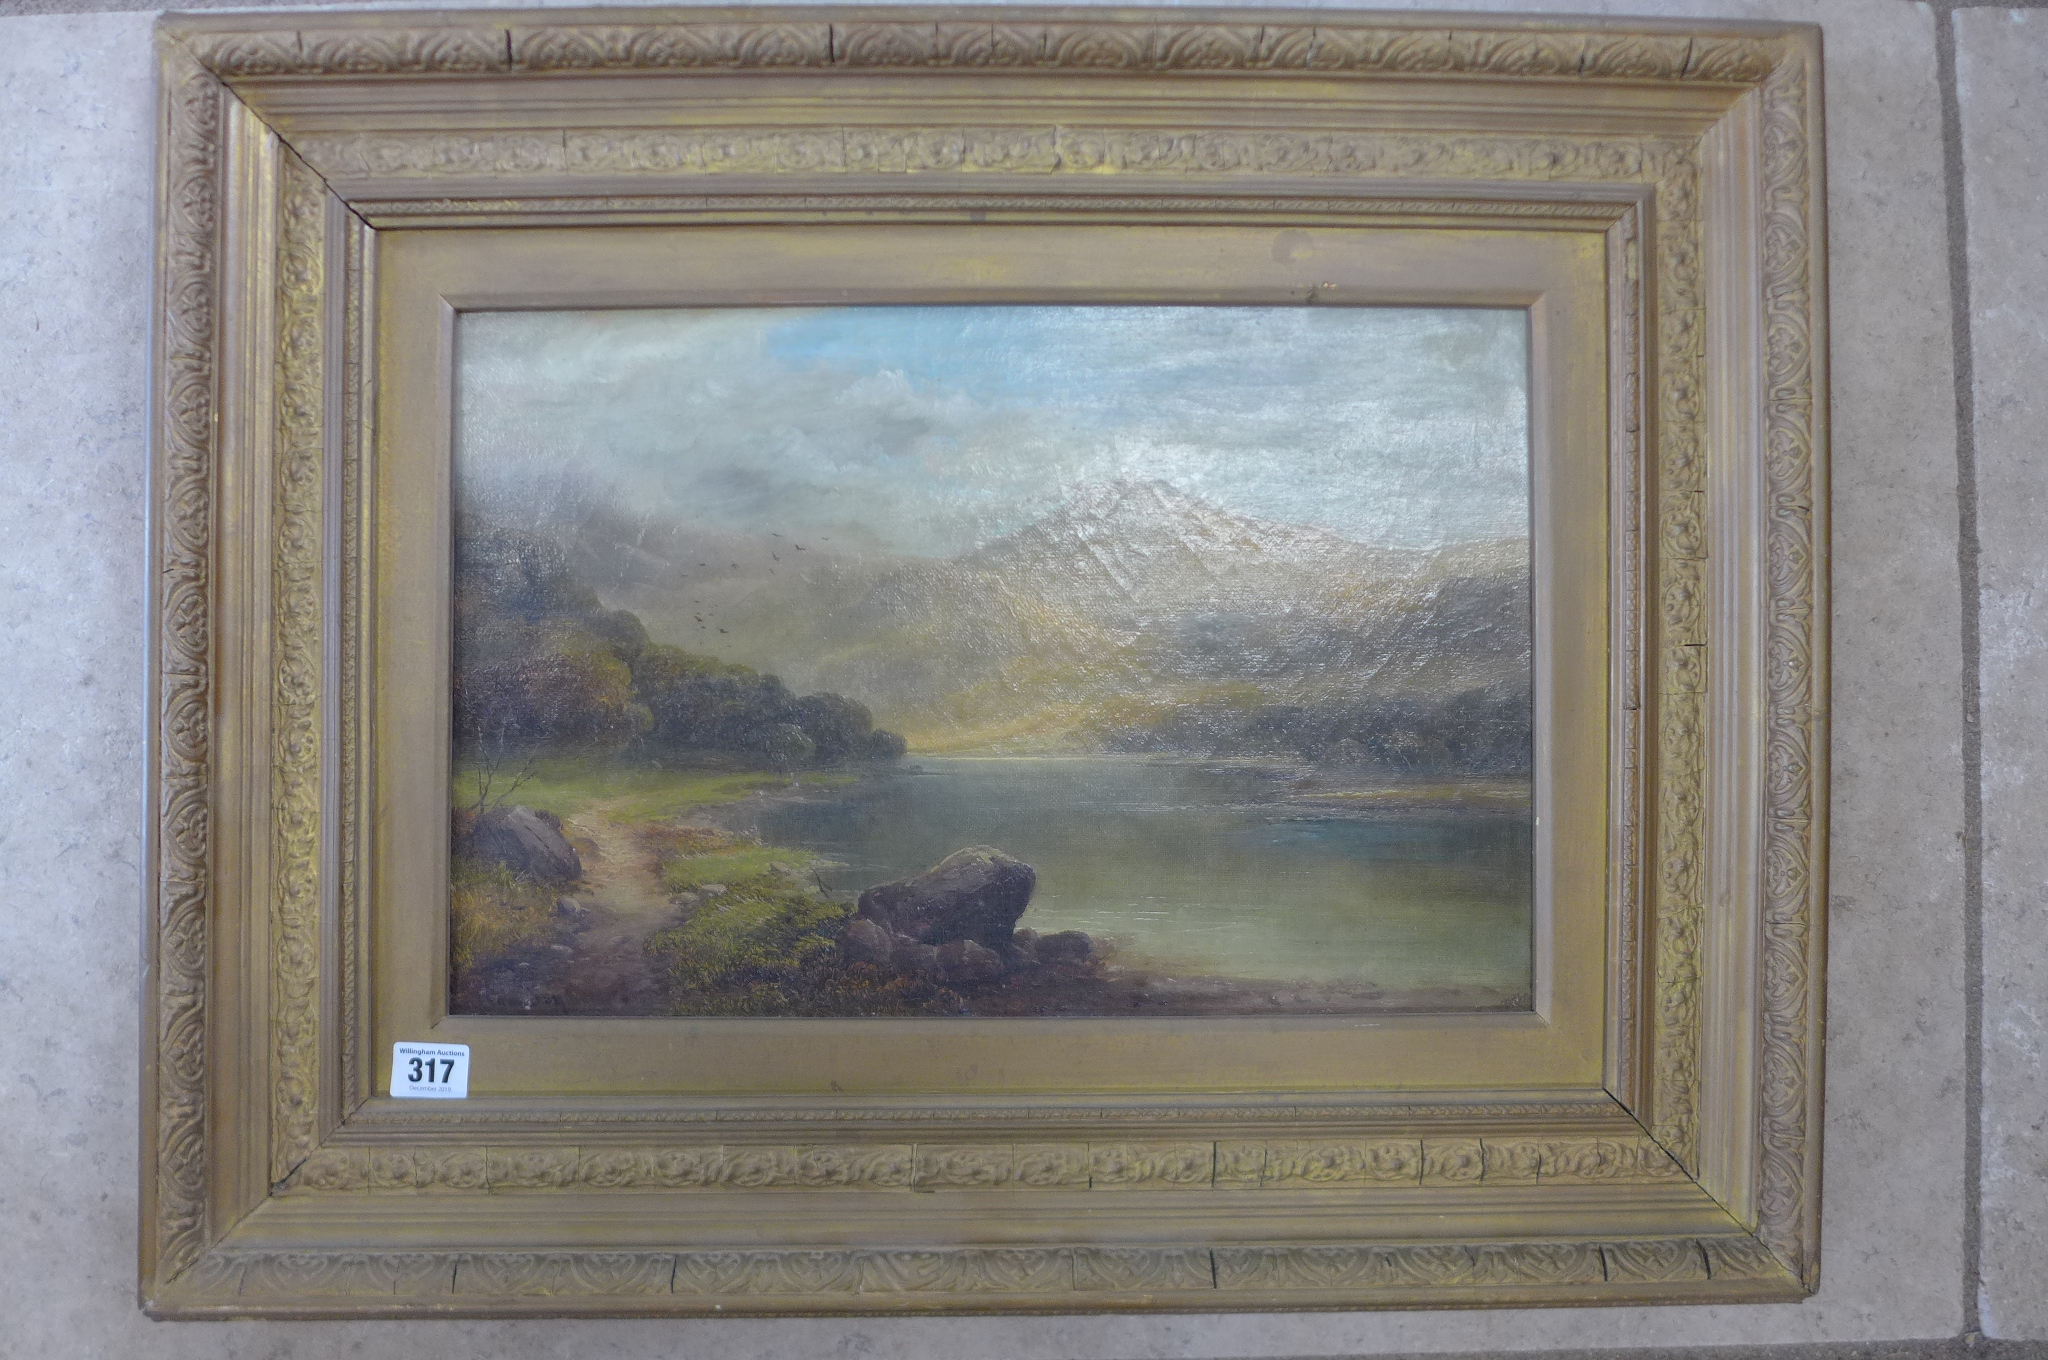 An oil on canvas, Scottish loch scene, signed Tom Seymour, in a gilt frame, 55x70 cm, some overall